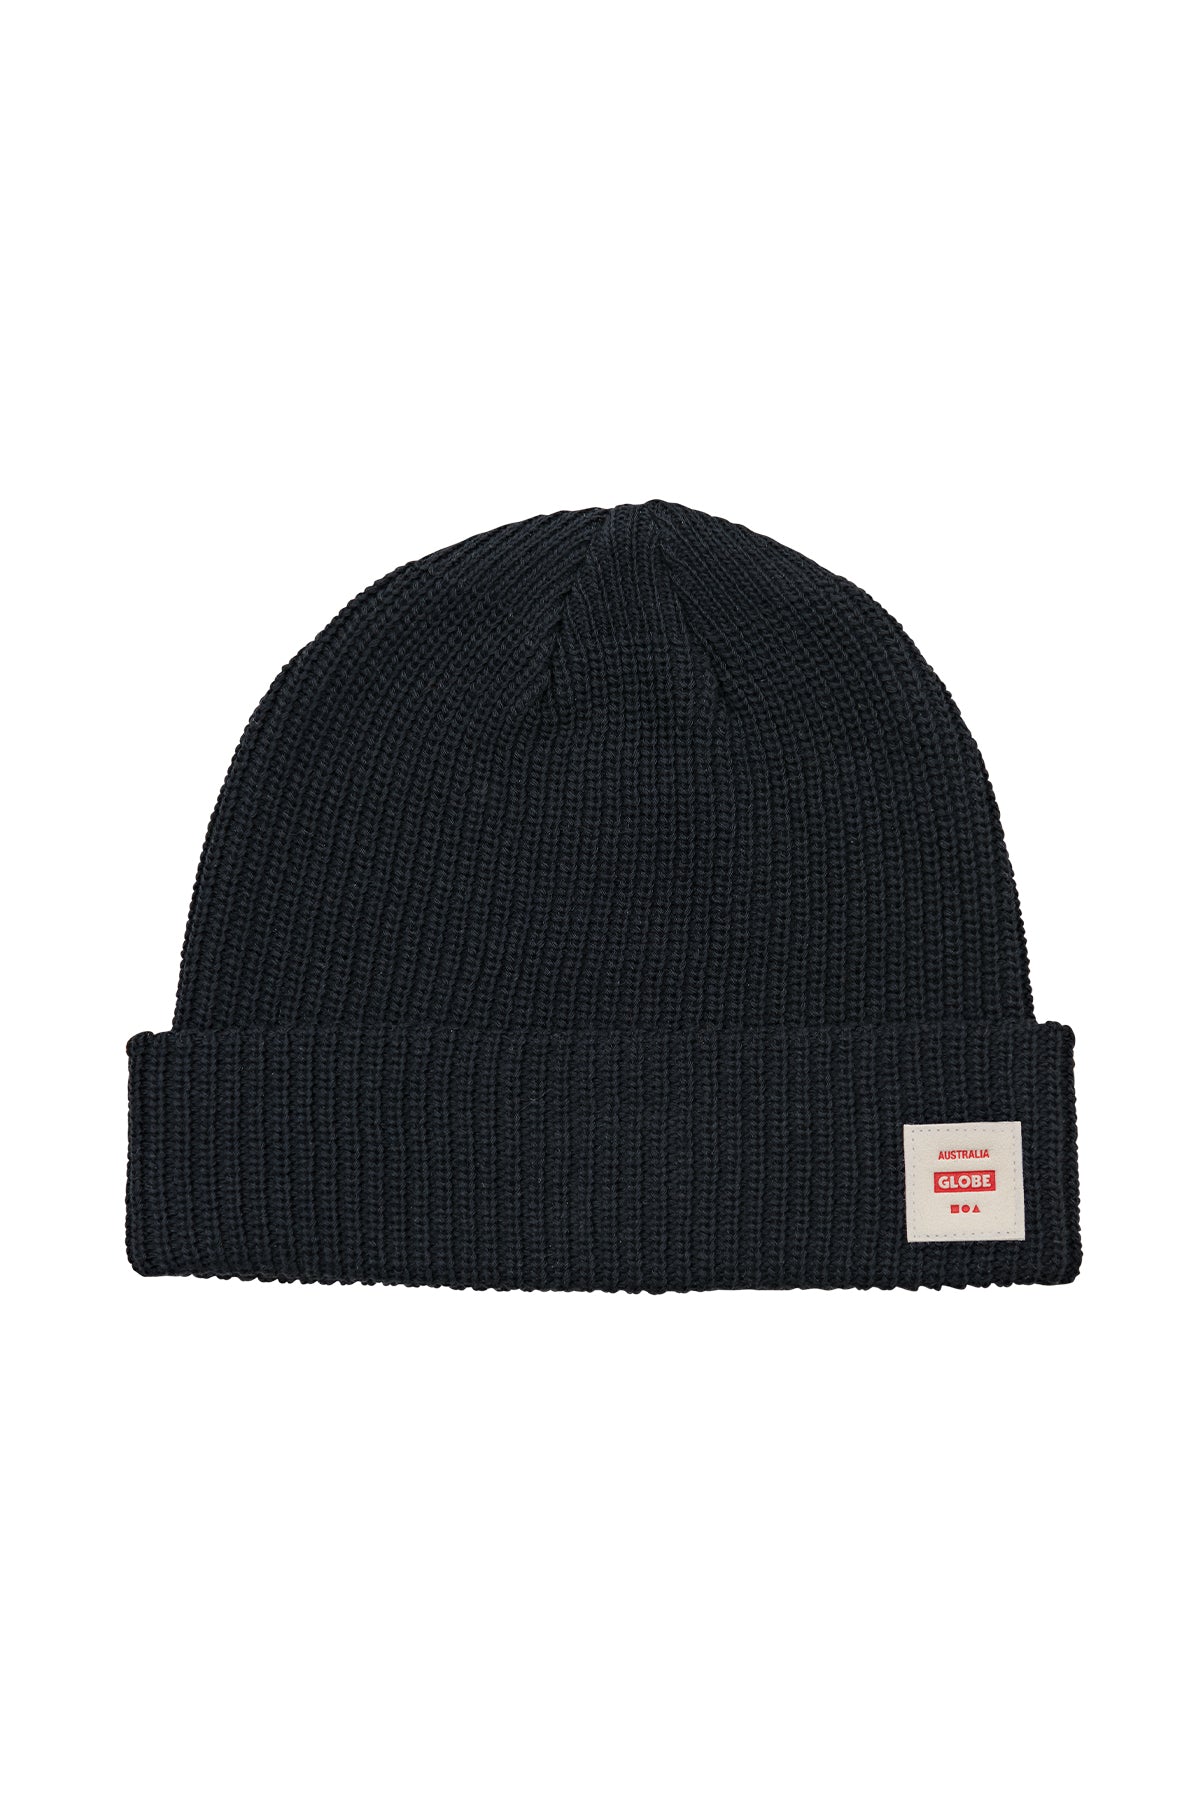 front view of Black Globe beanie